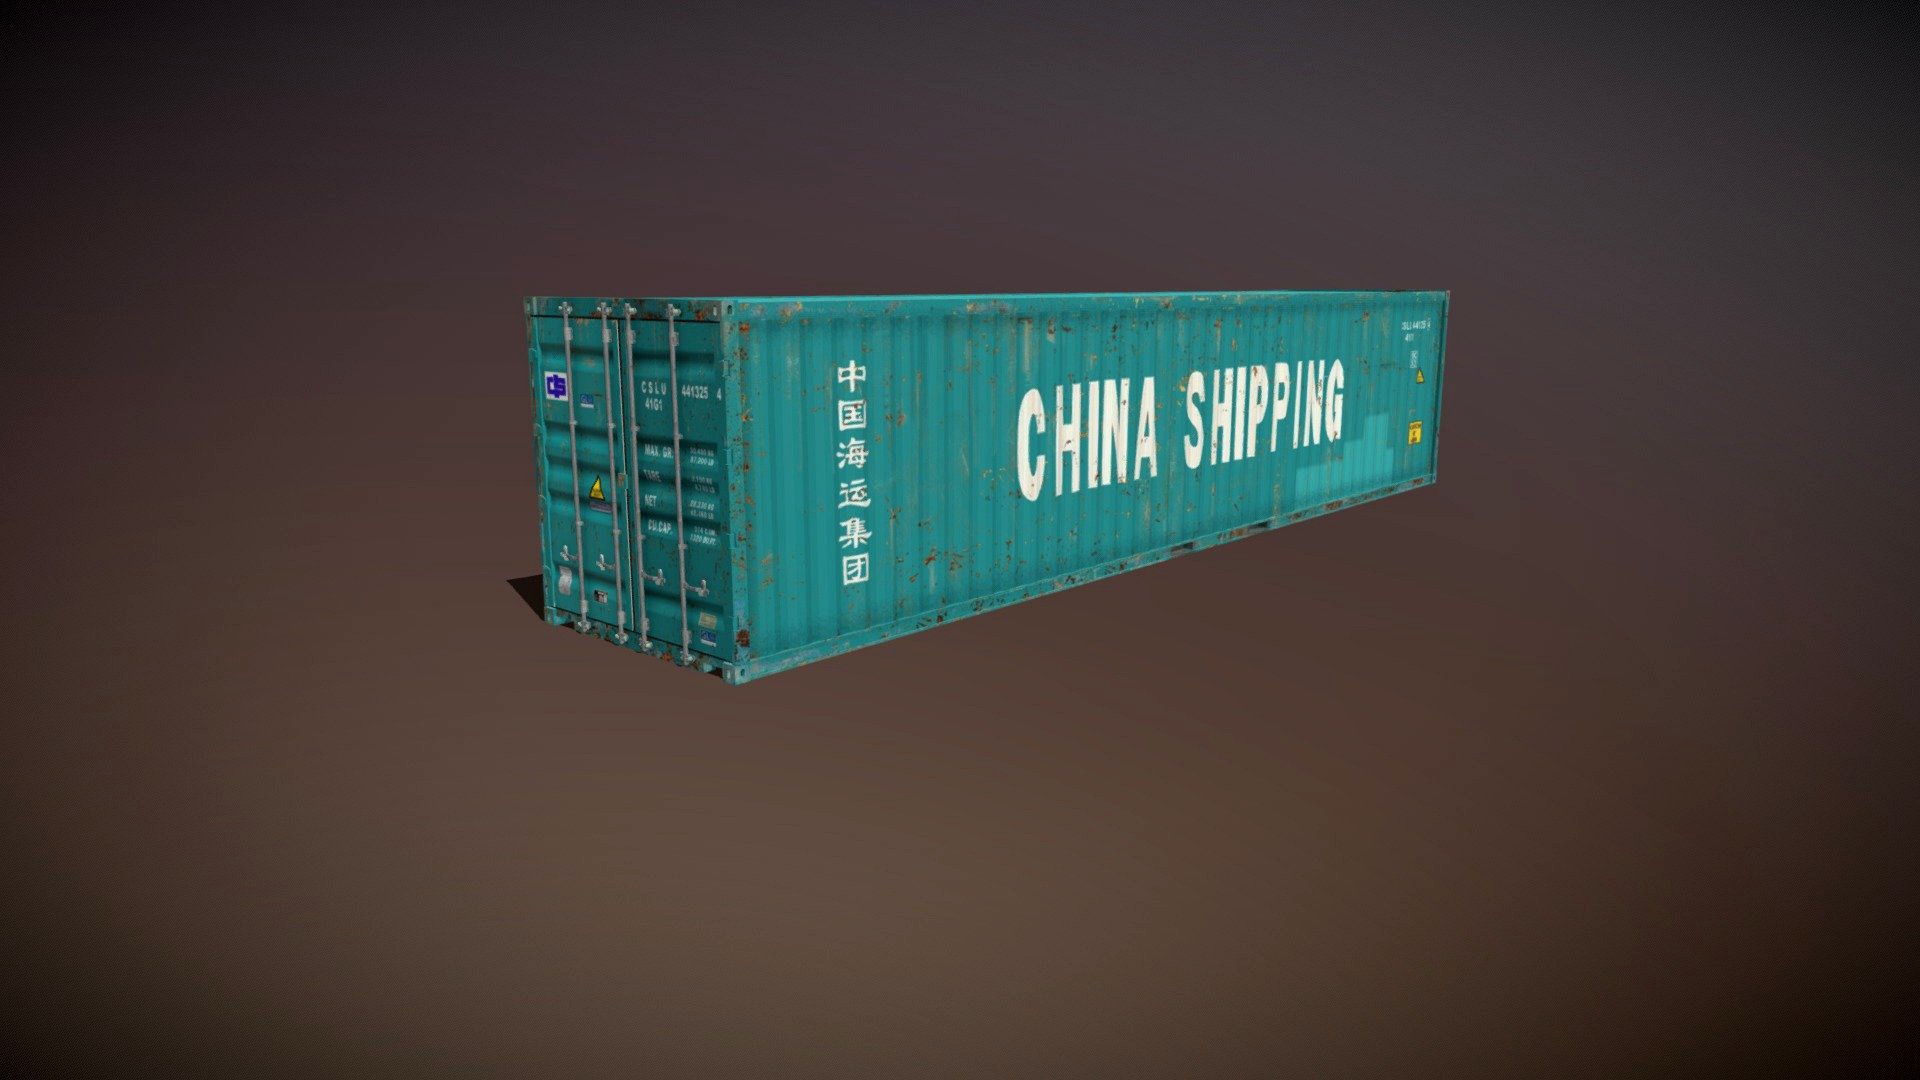 40ft Shipping Container - China Shipping